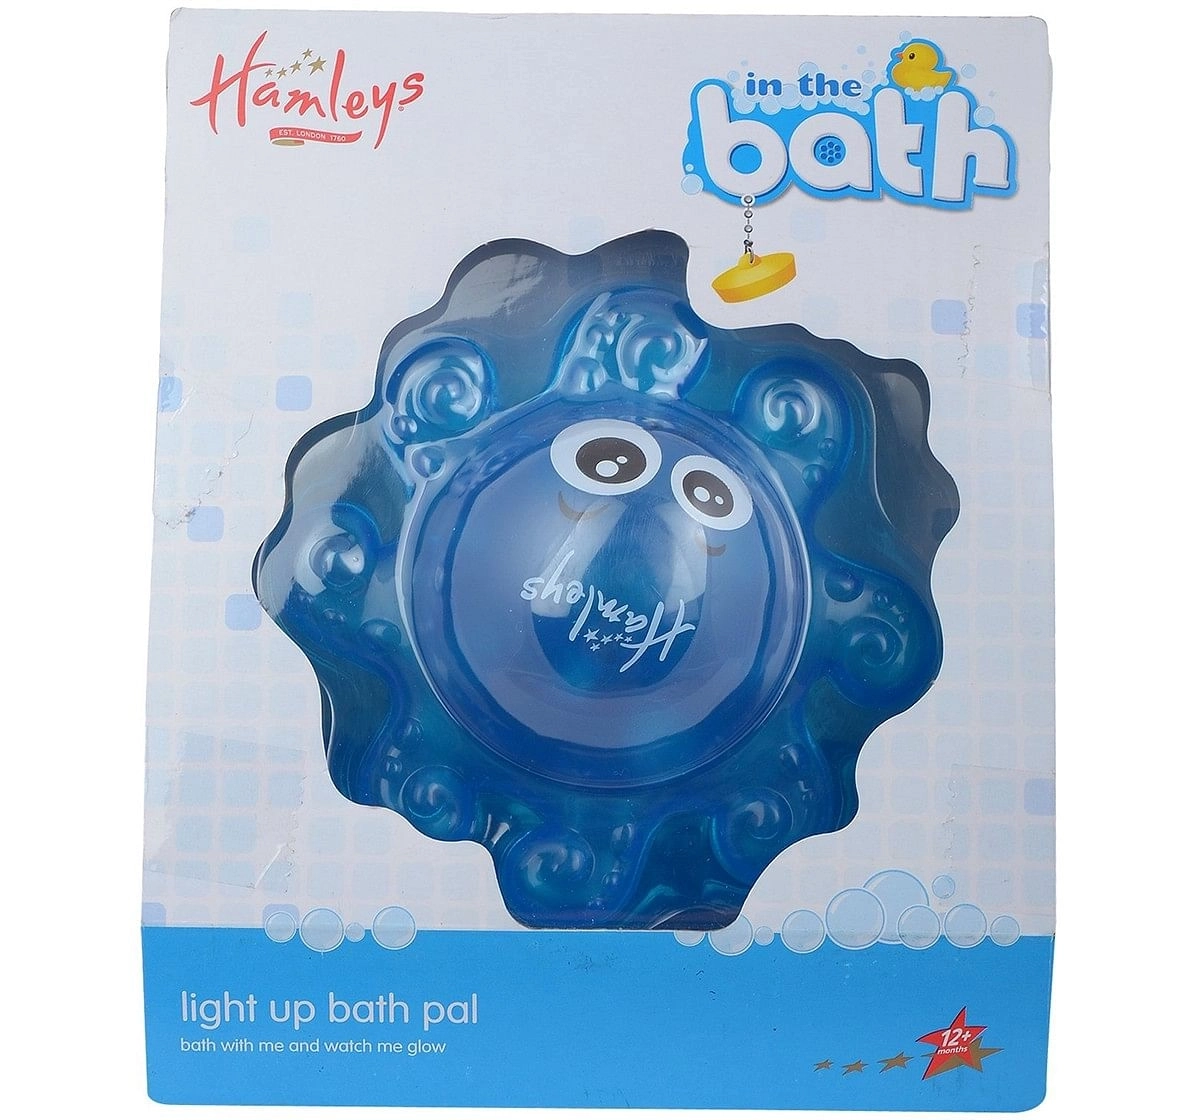 Hamleys Floating Light Up Octopus - Blue Bath Toys & Accessories for Kids age 2Y+ (Blue)